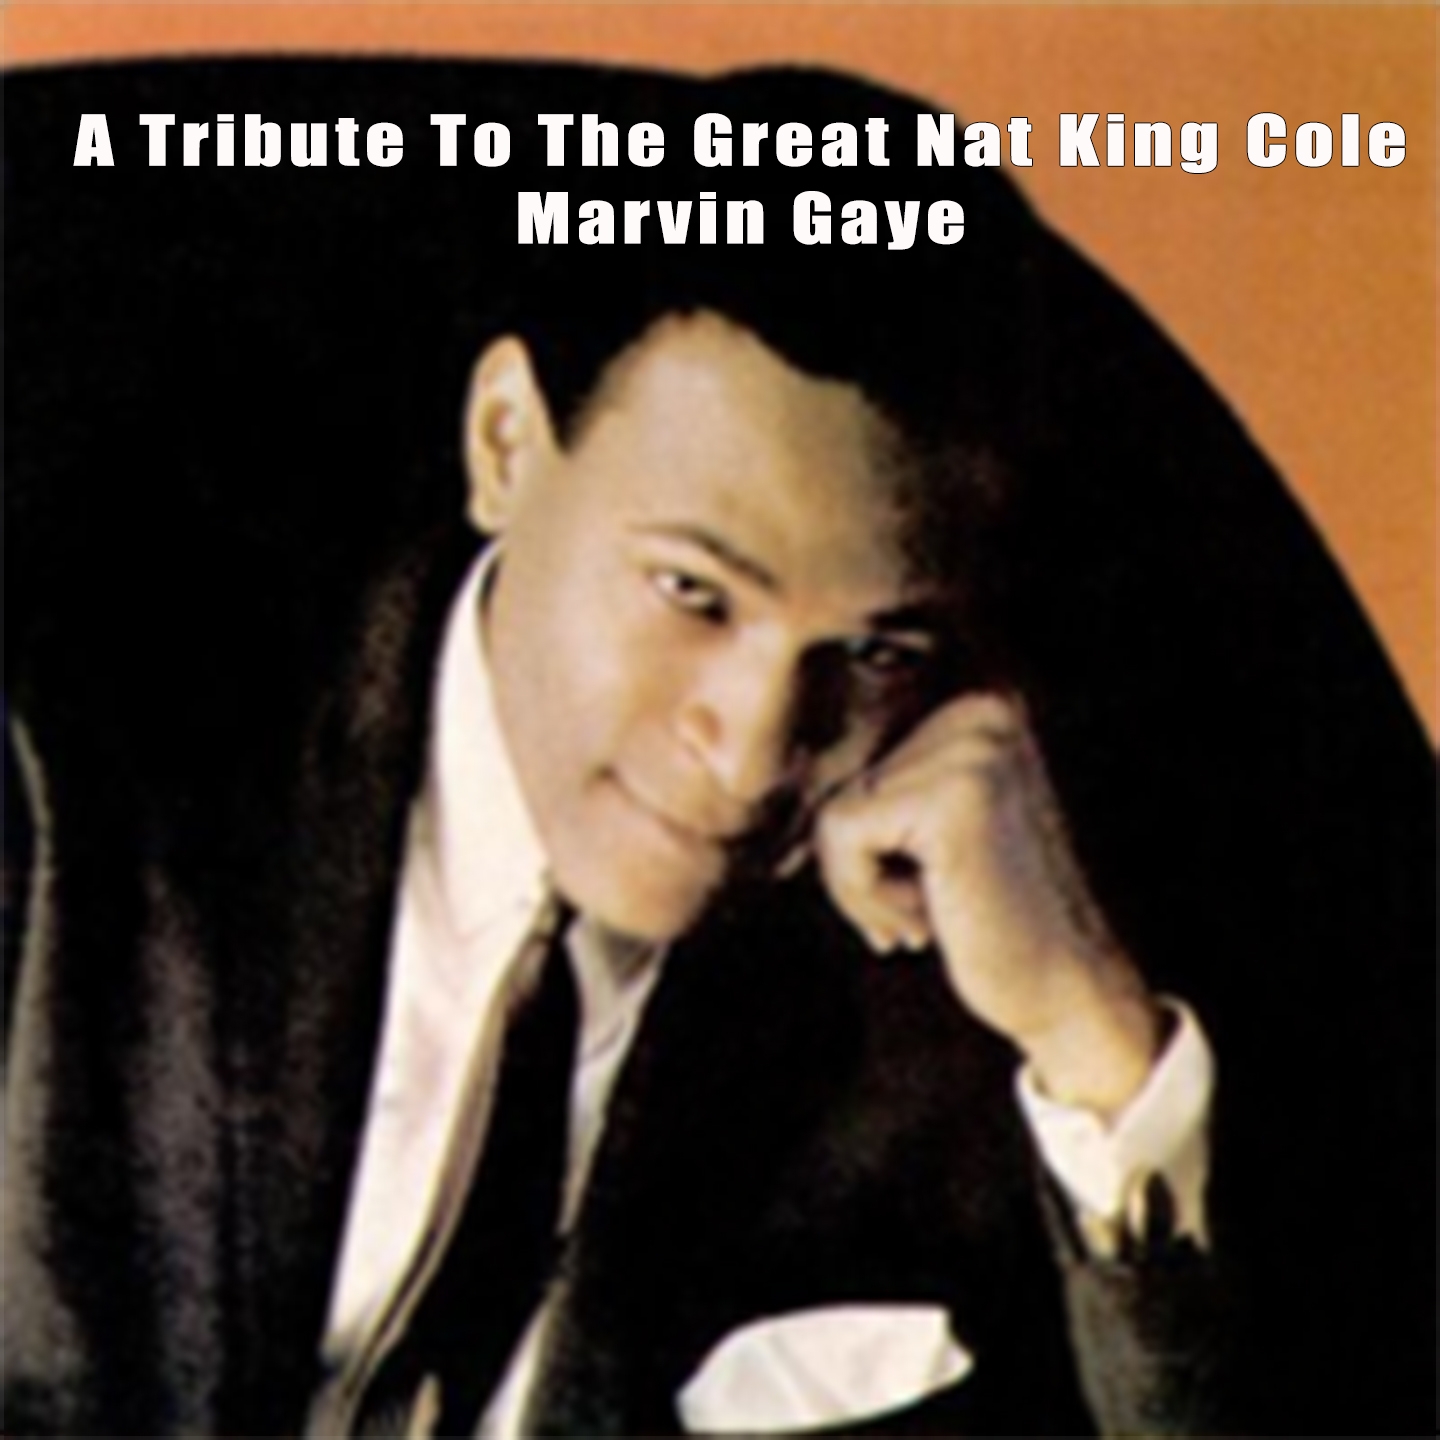 A Tribute To The Great Nat King Cole - Marvin Gaye